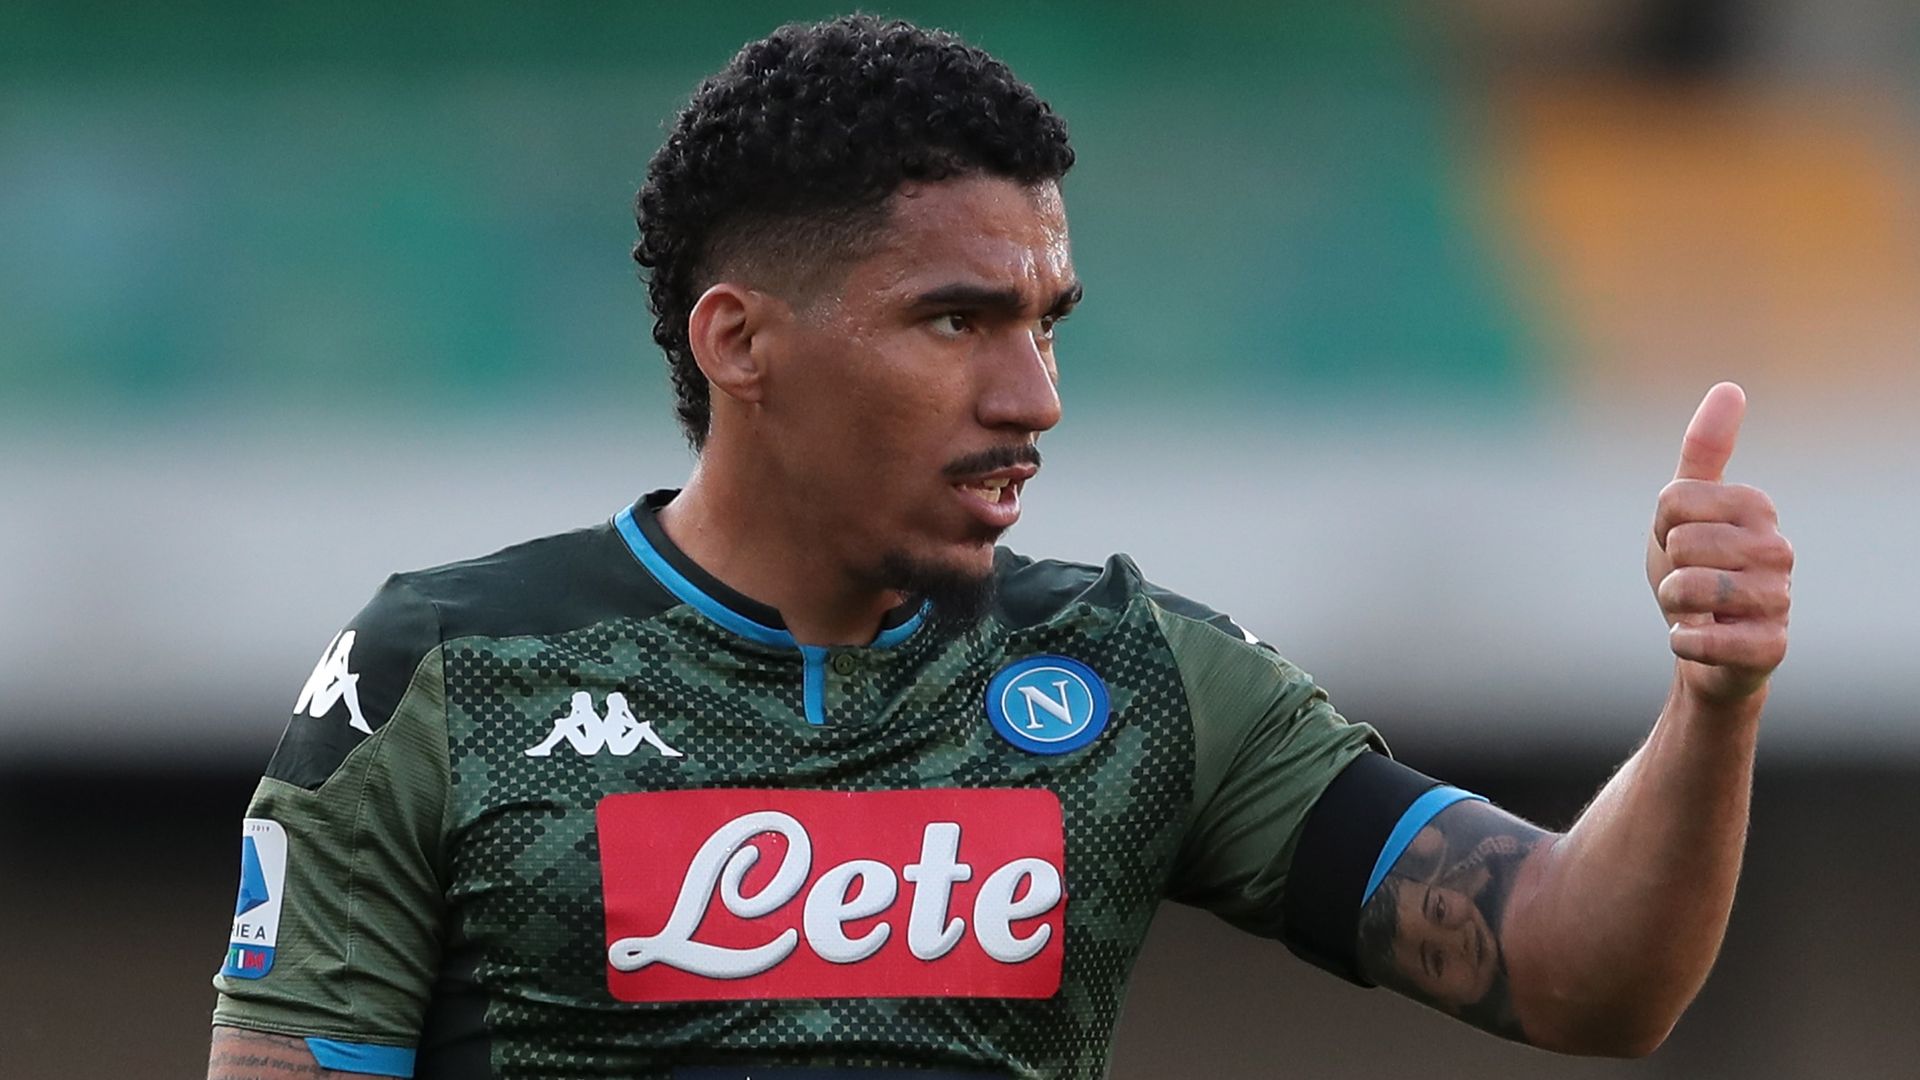 Allan joins Everton from Napoli